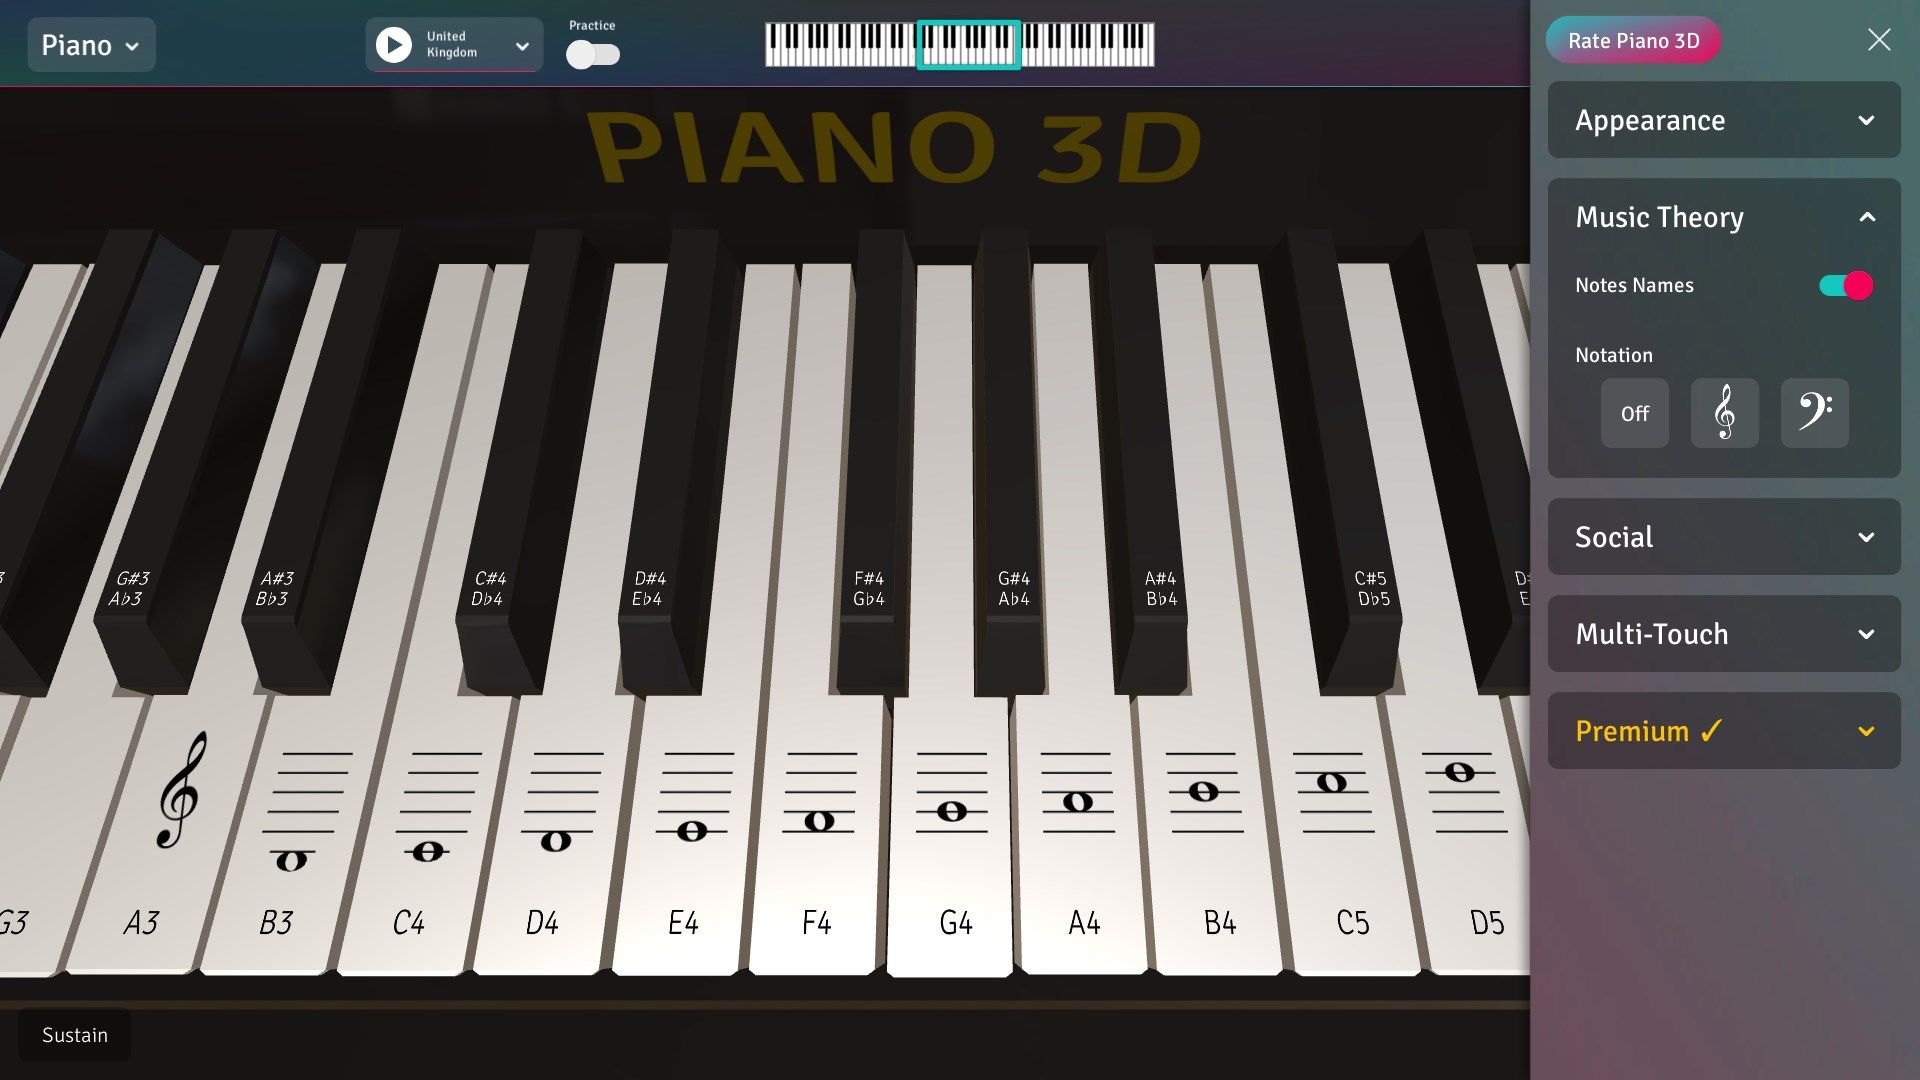 You can also learon music theory with Piano 3D.